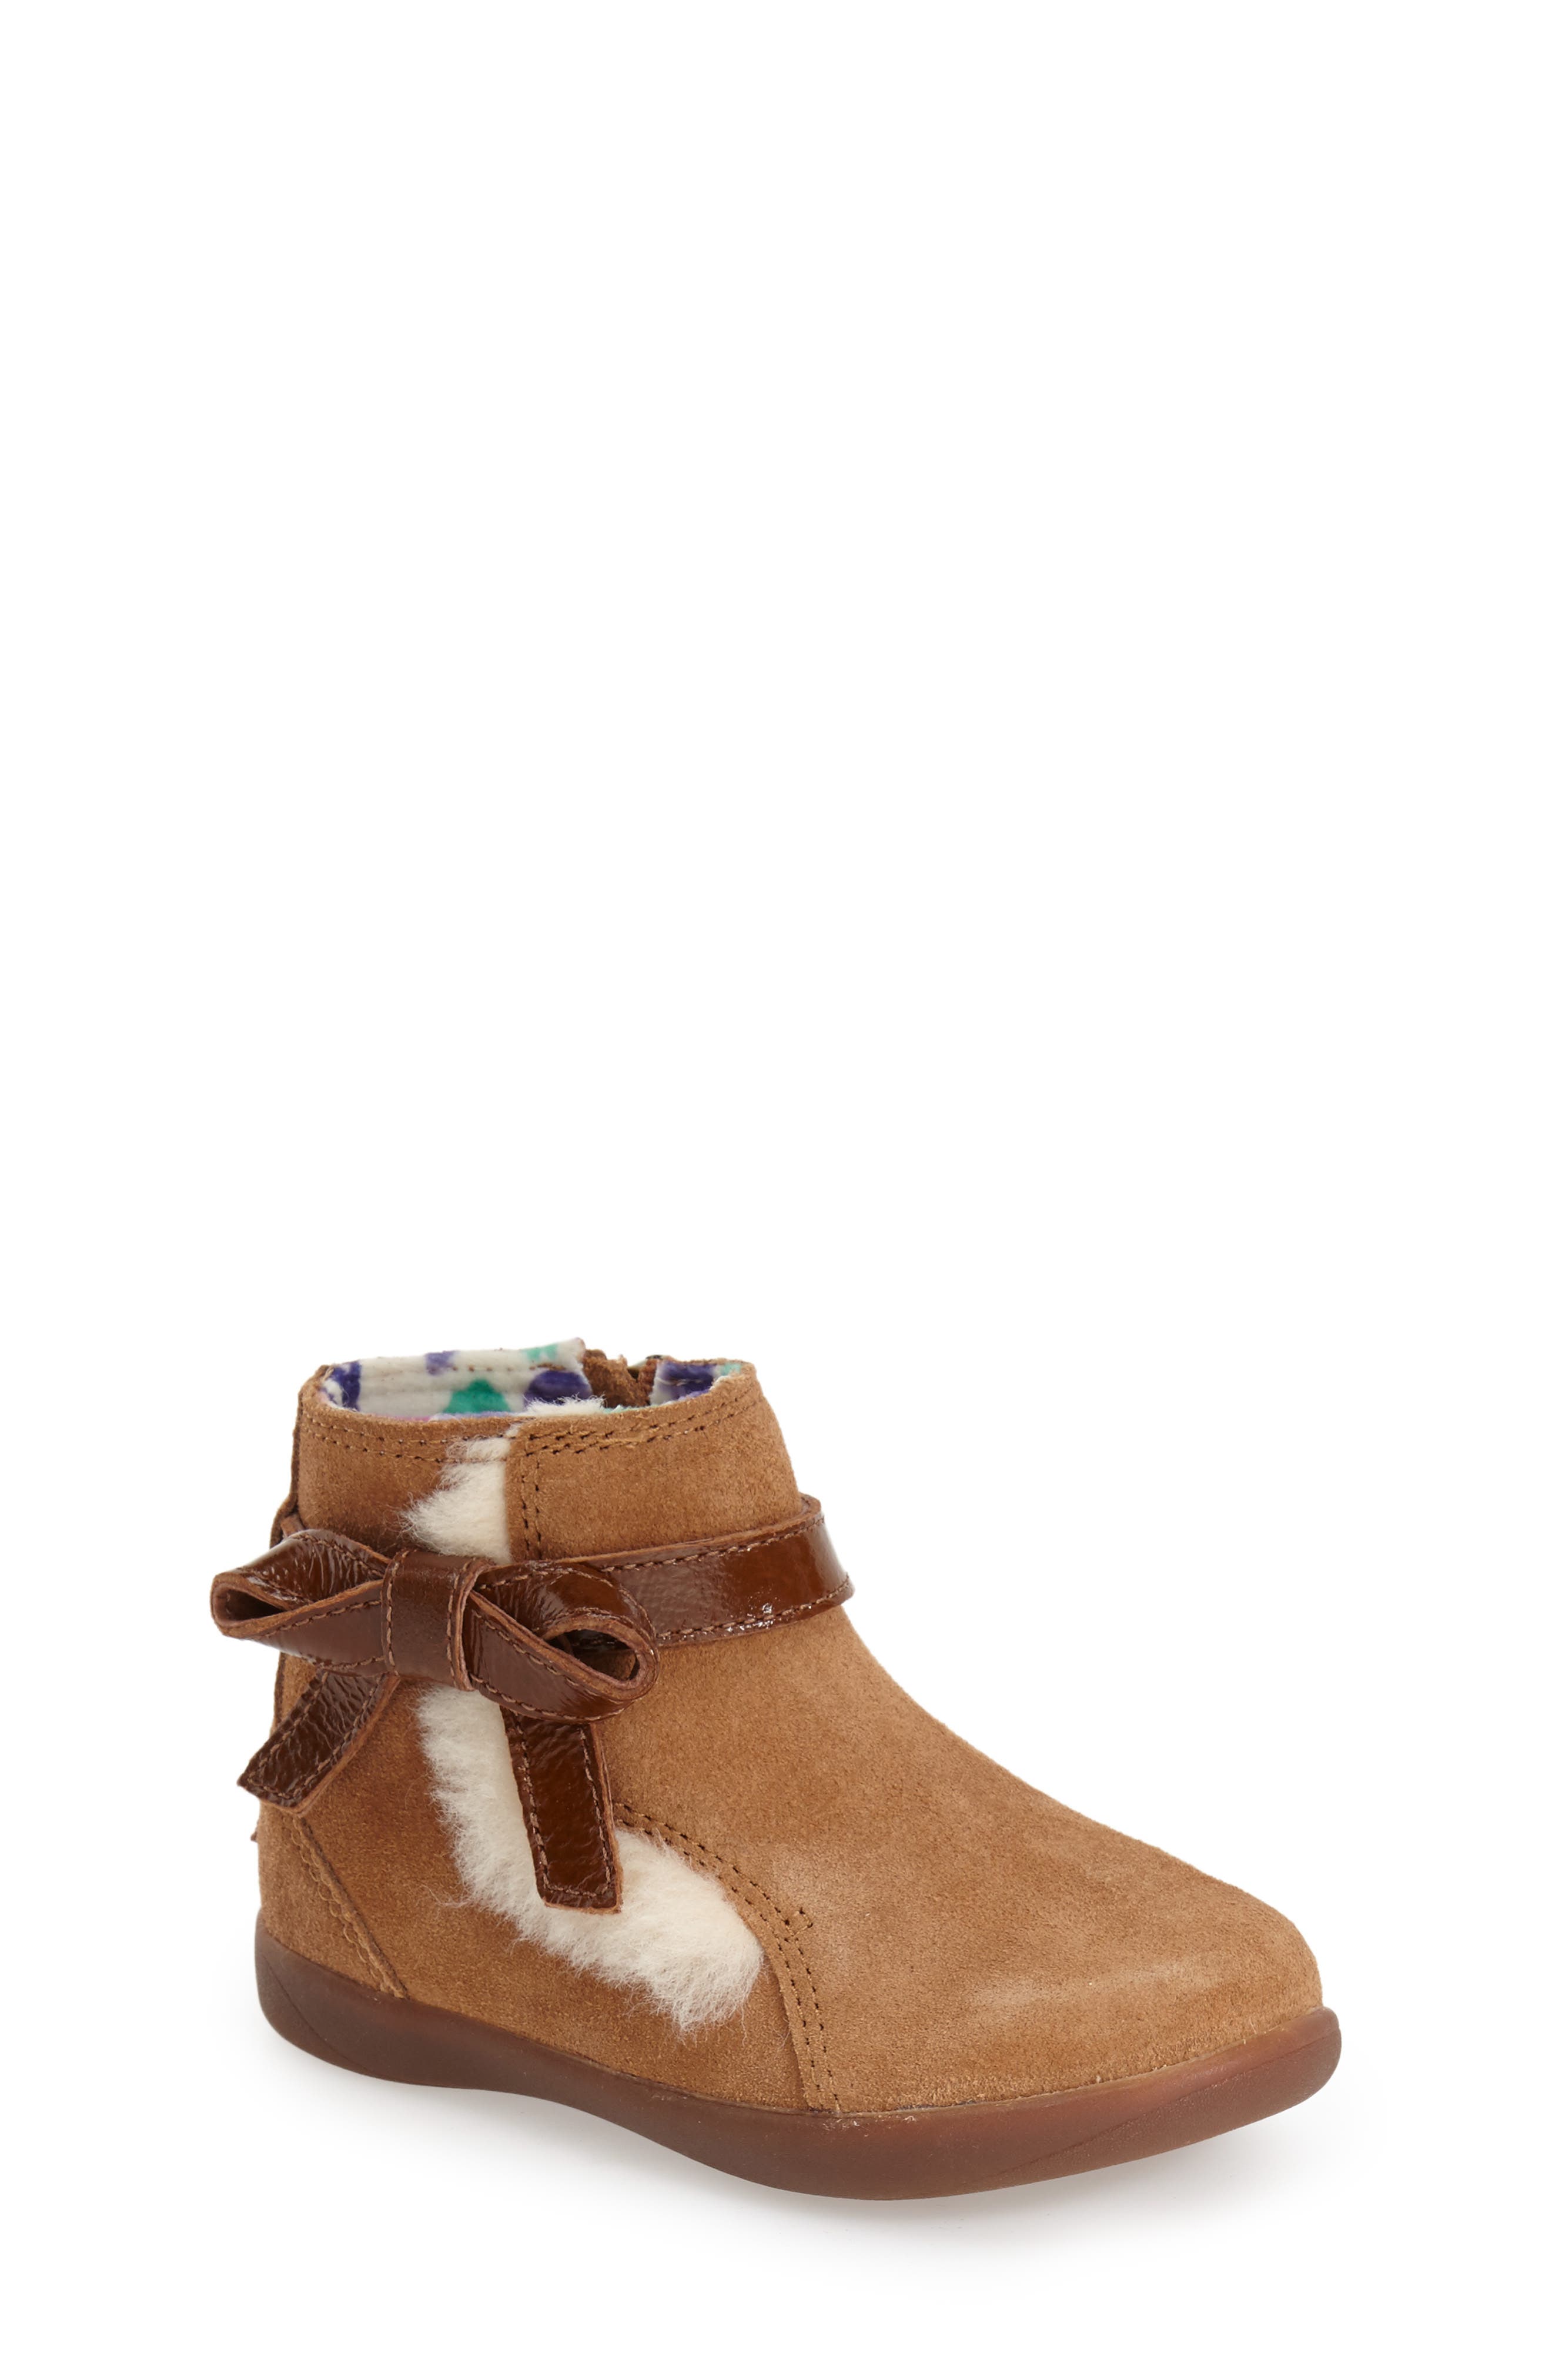 ugg boots fawn color